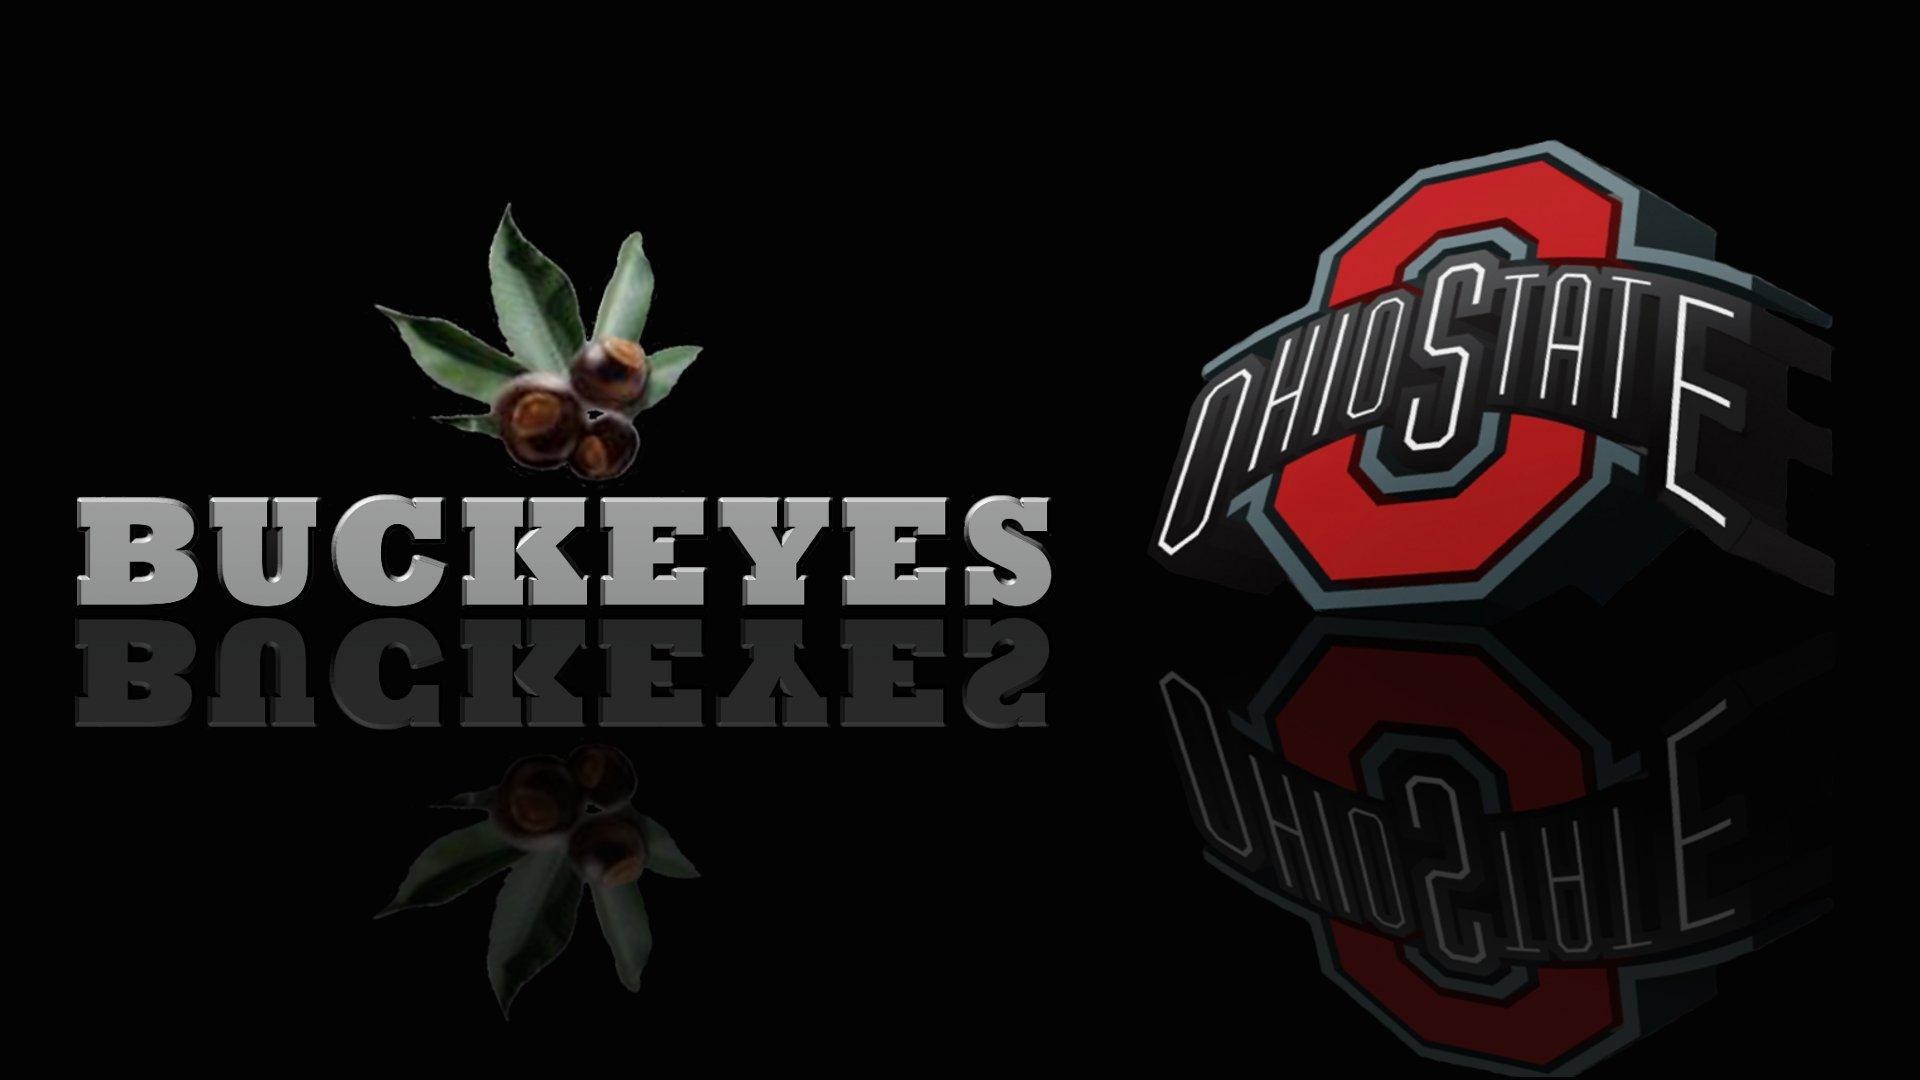 1920x1080 Sports Wallpapers Ohio State Buckeyes Football Wallpapers PixelsTalk Ohio  State Buckeyes Wallpaper Best Cool Wallpaper HD Download 